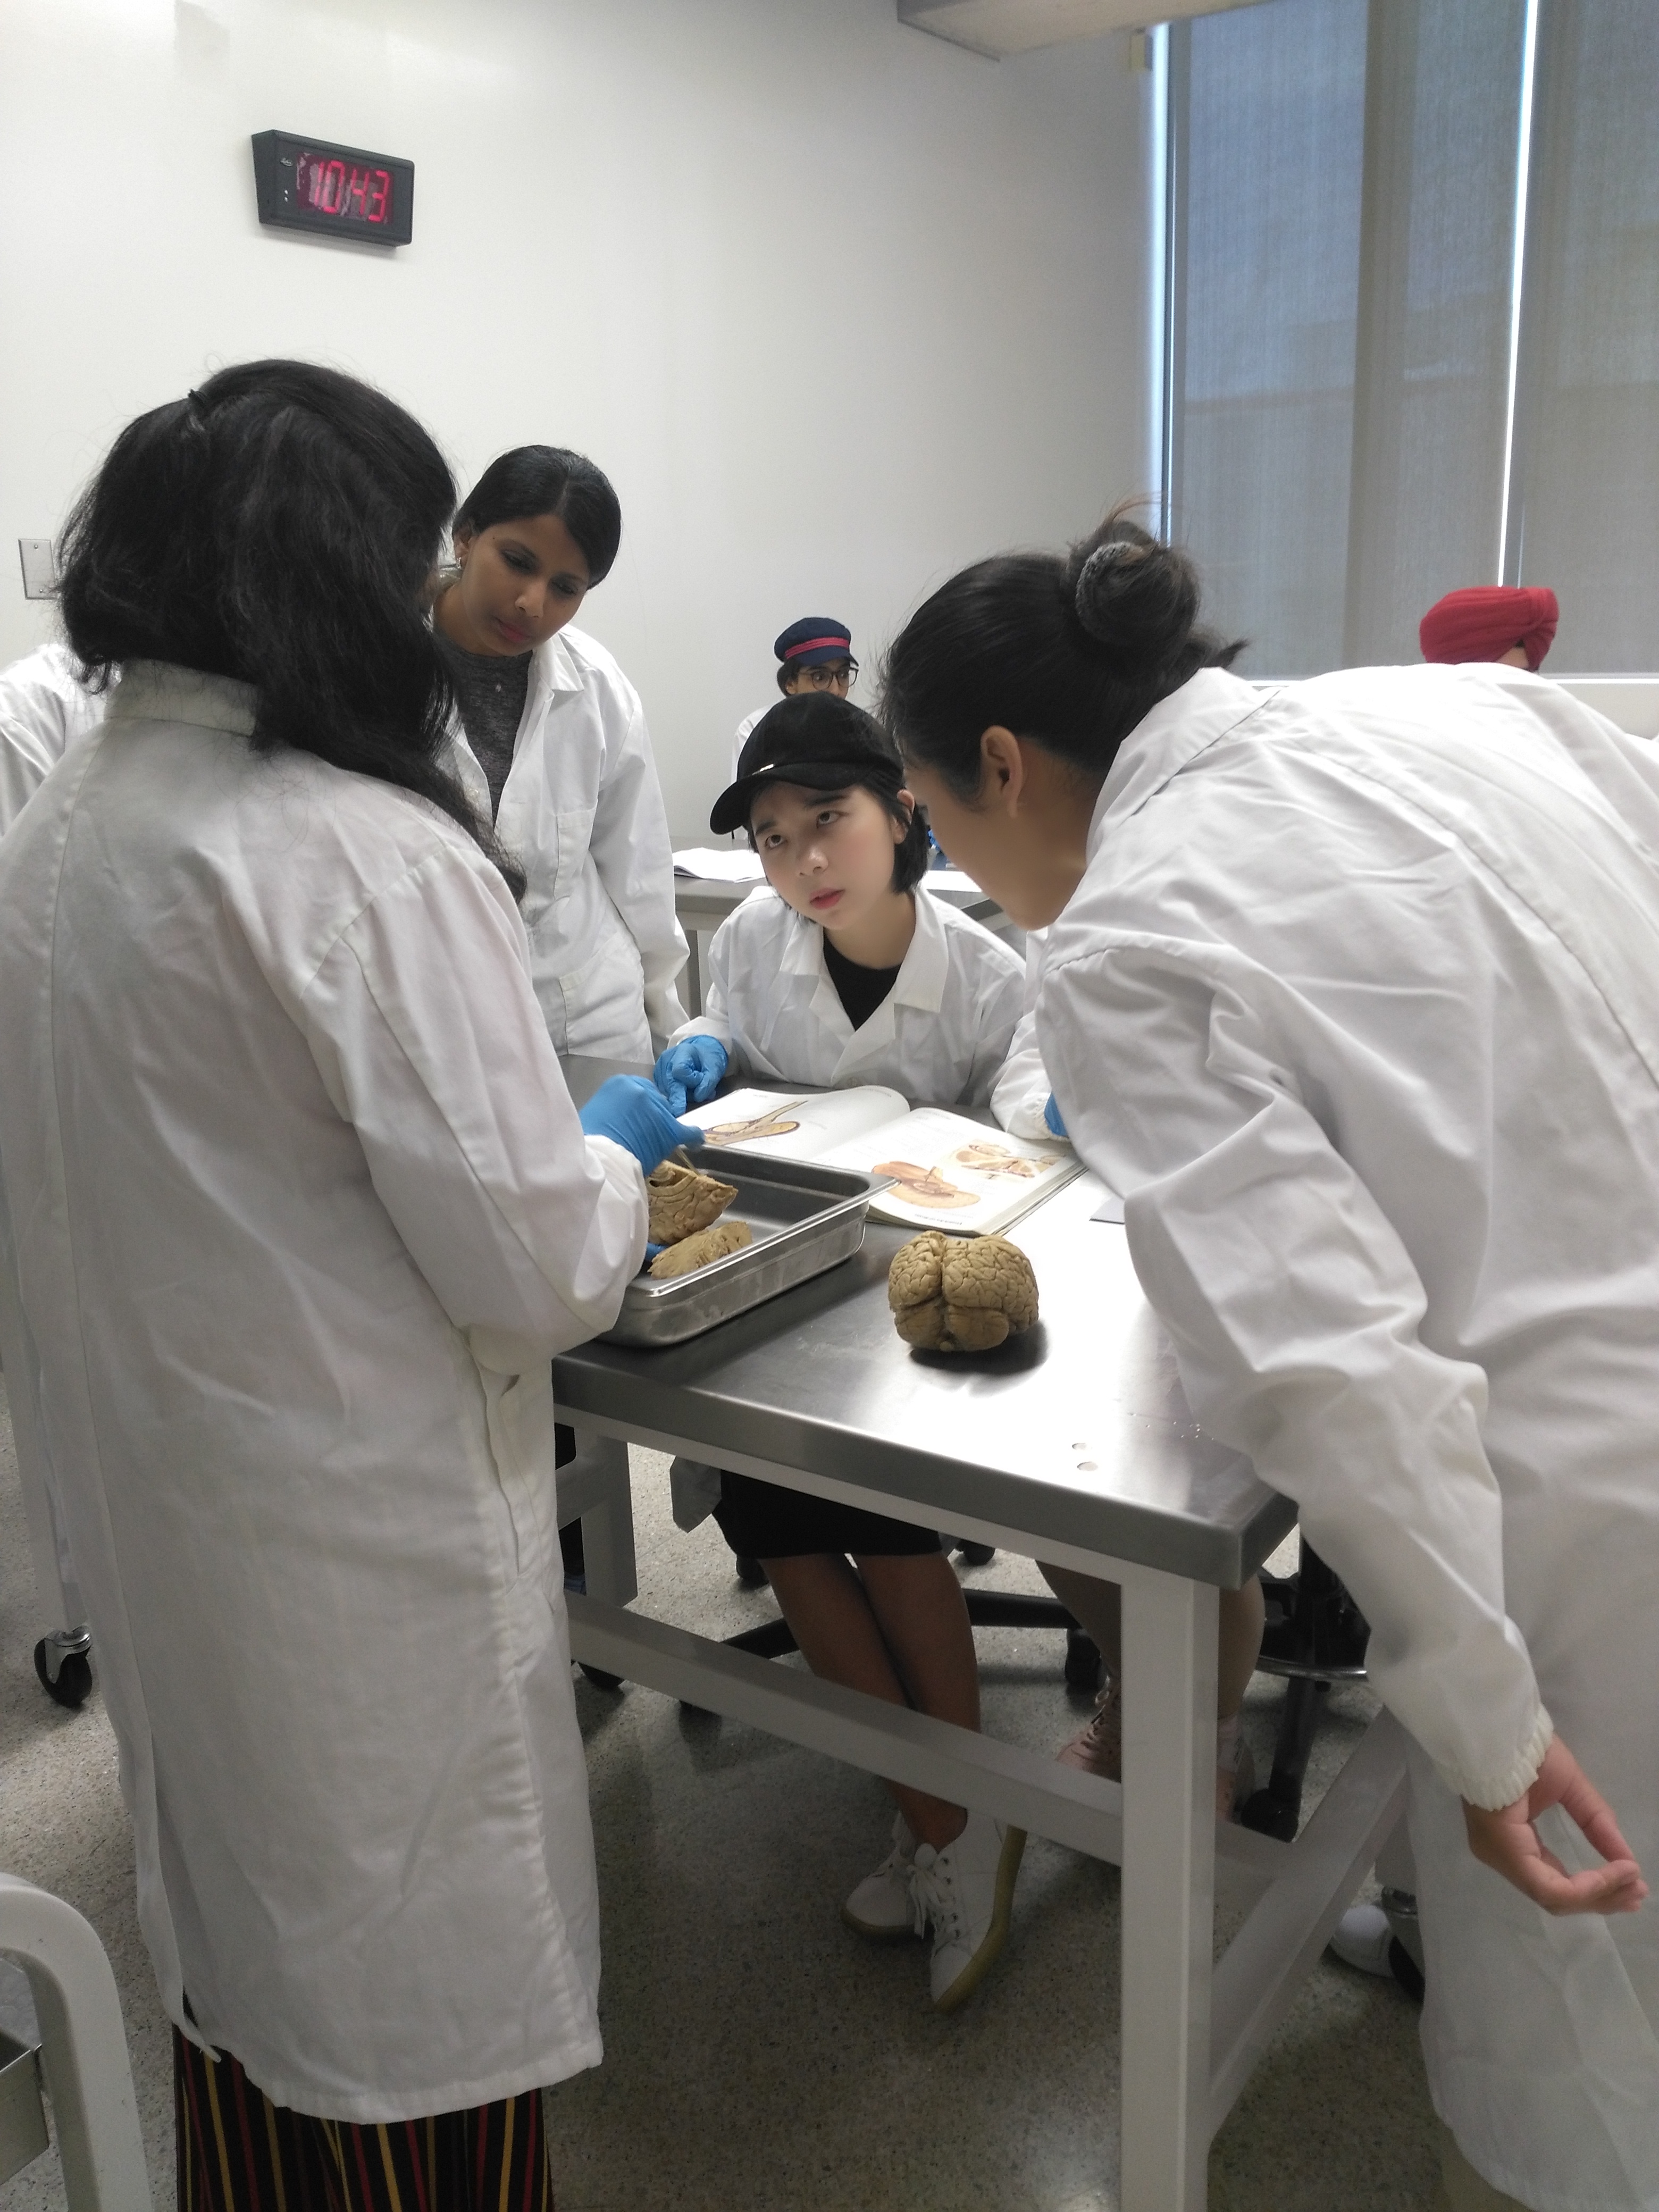 Demonstration of the parts of the human brain by faculty at the Human Anatomy Lab of Schulich School of Medicine & Dentistry - Windsor Campus (June 27, 2019)